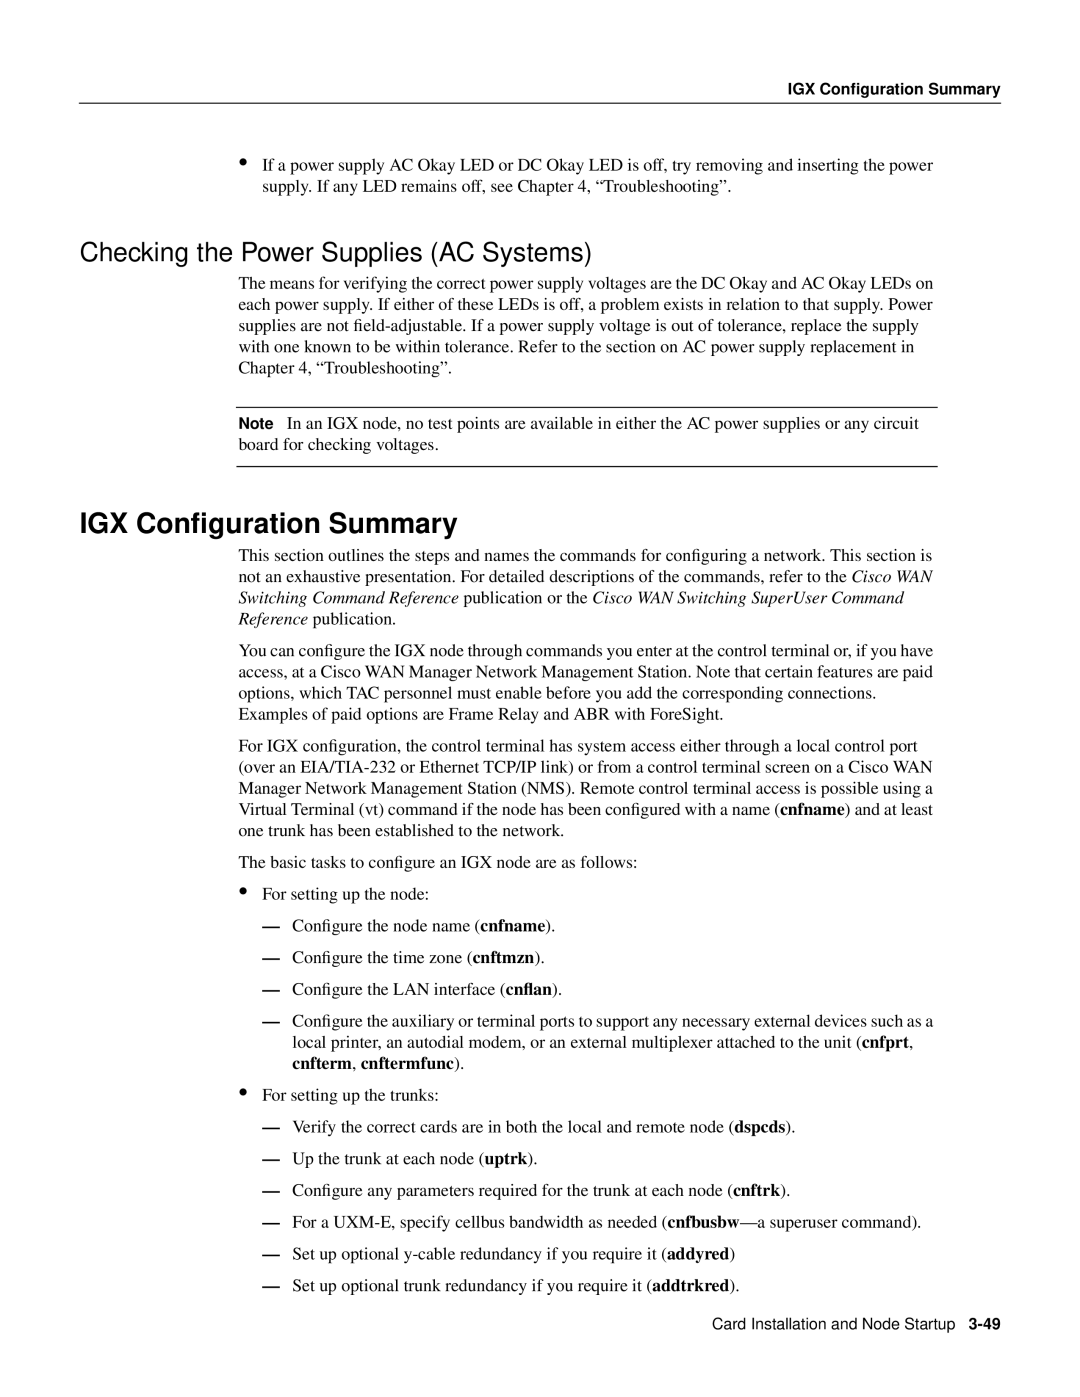 Cisco Systems IGX 8400 Series manual IGX Conﬁguration Summary, Checking the Power Supplies AC Systems 